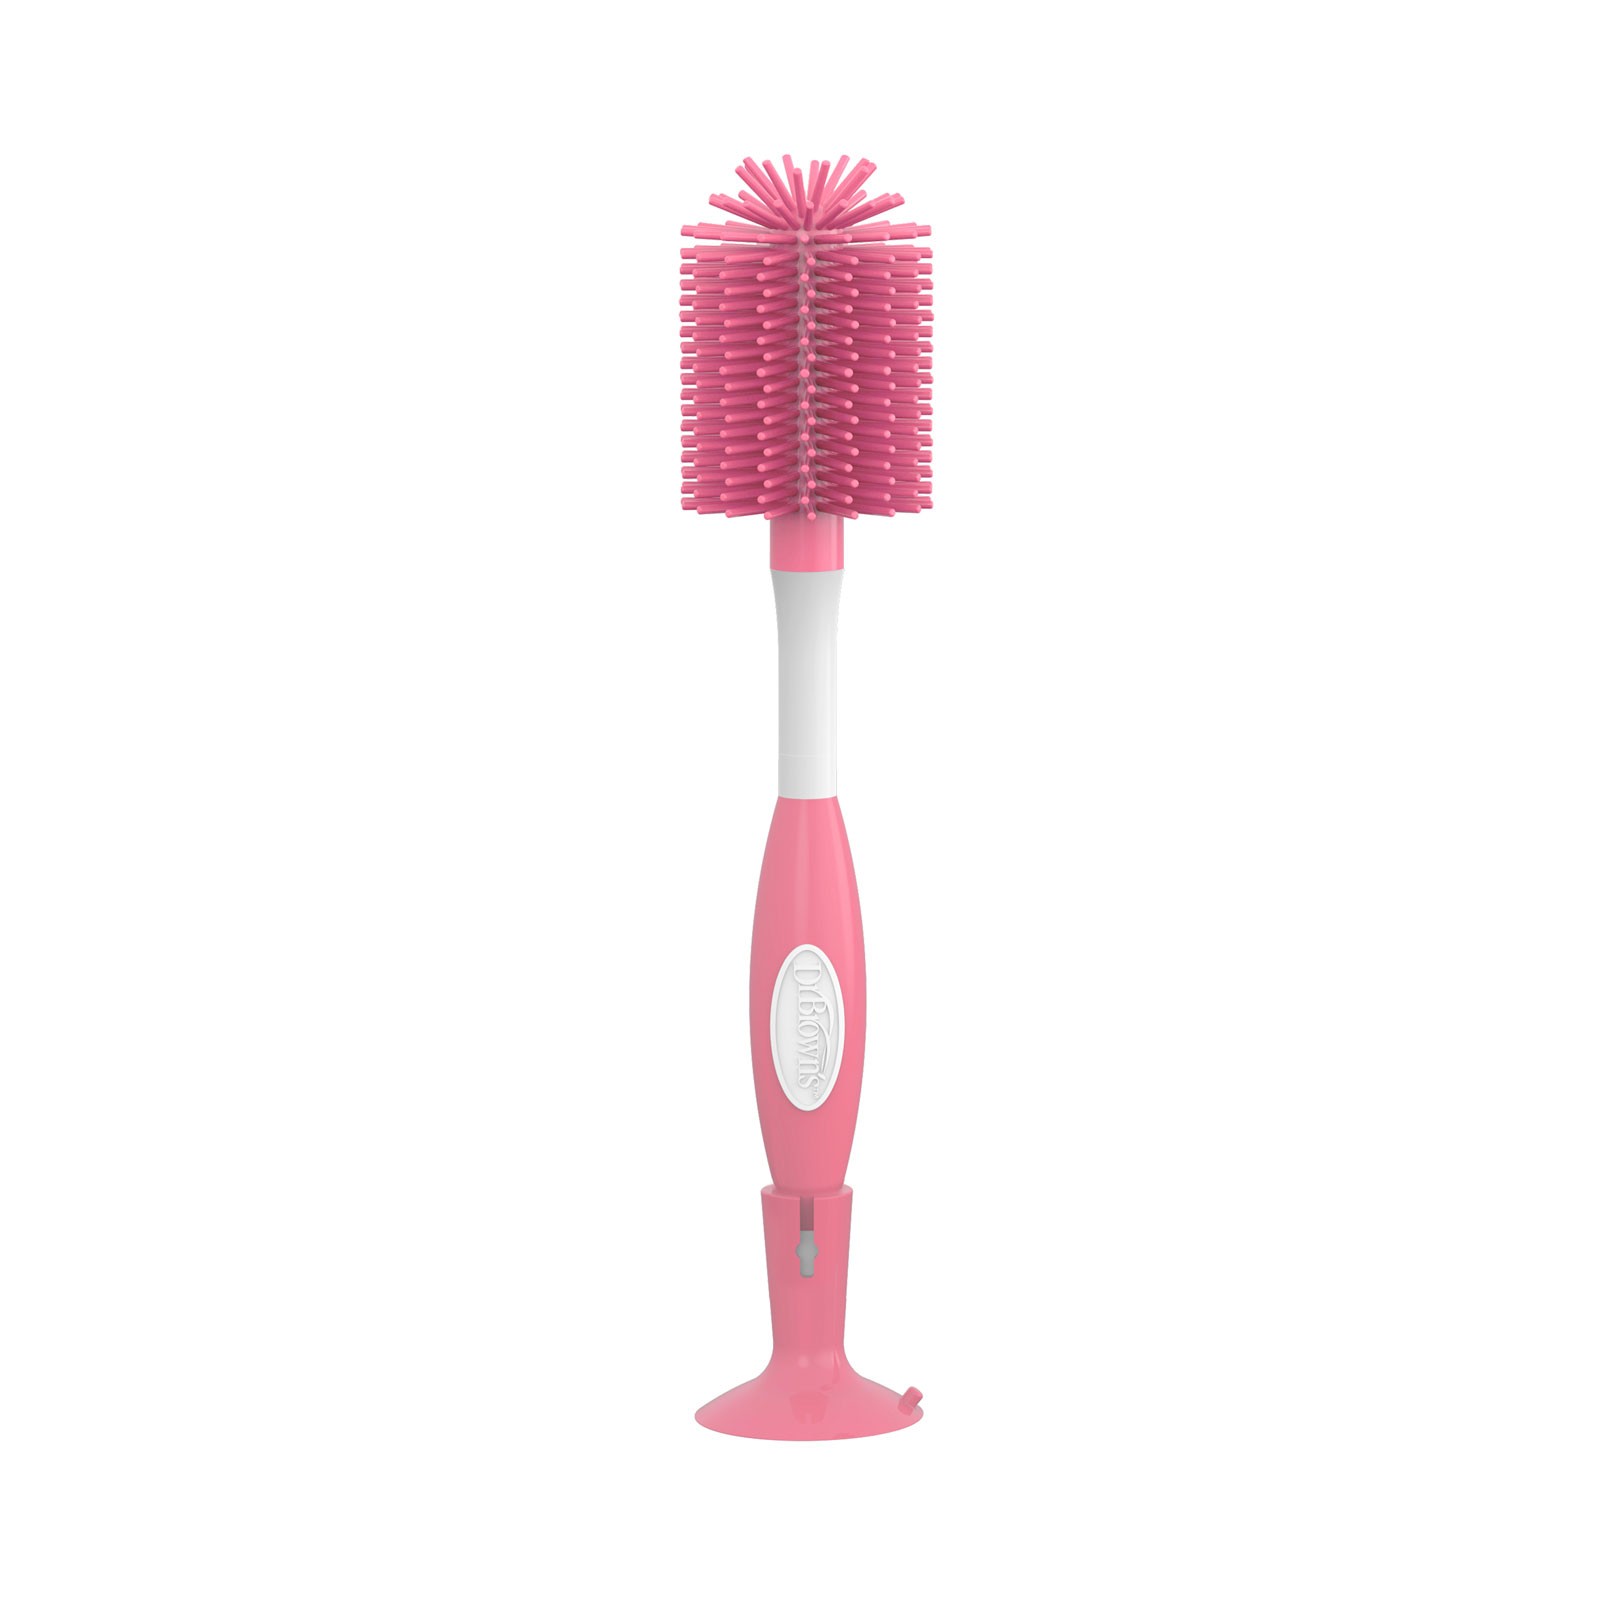 https://www.drbrownsbaby.com/wp-content/uploads/2022/02/AC229_Product_Soft_Touch_Bottle_Brush_Pink_1-Pack_in_storage_base.jpg